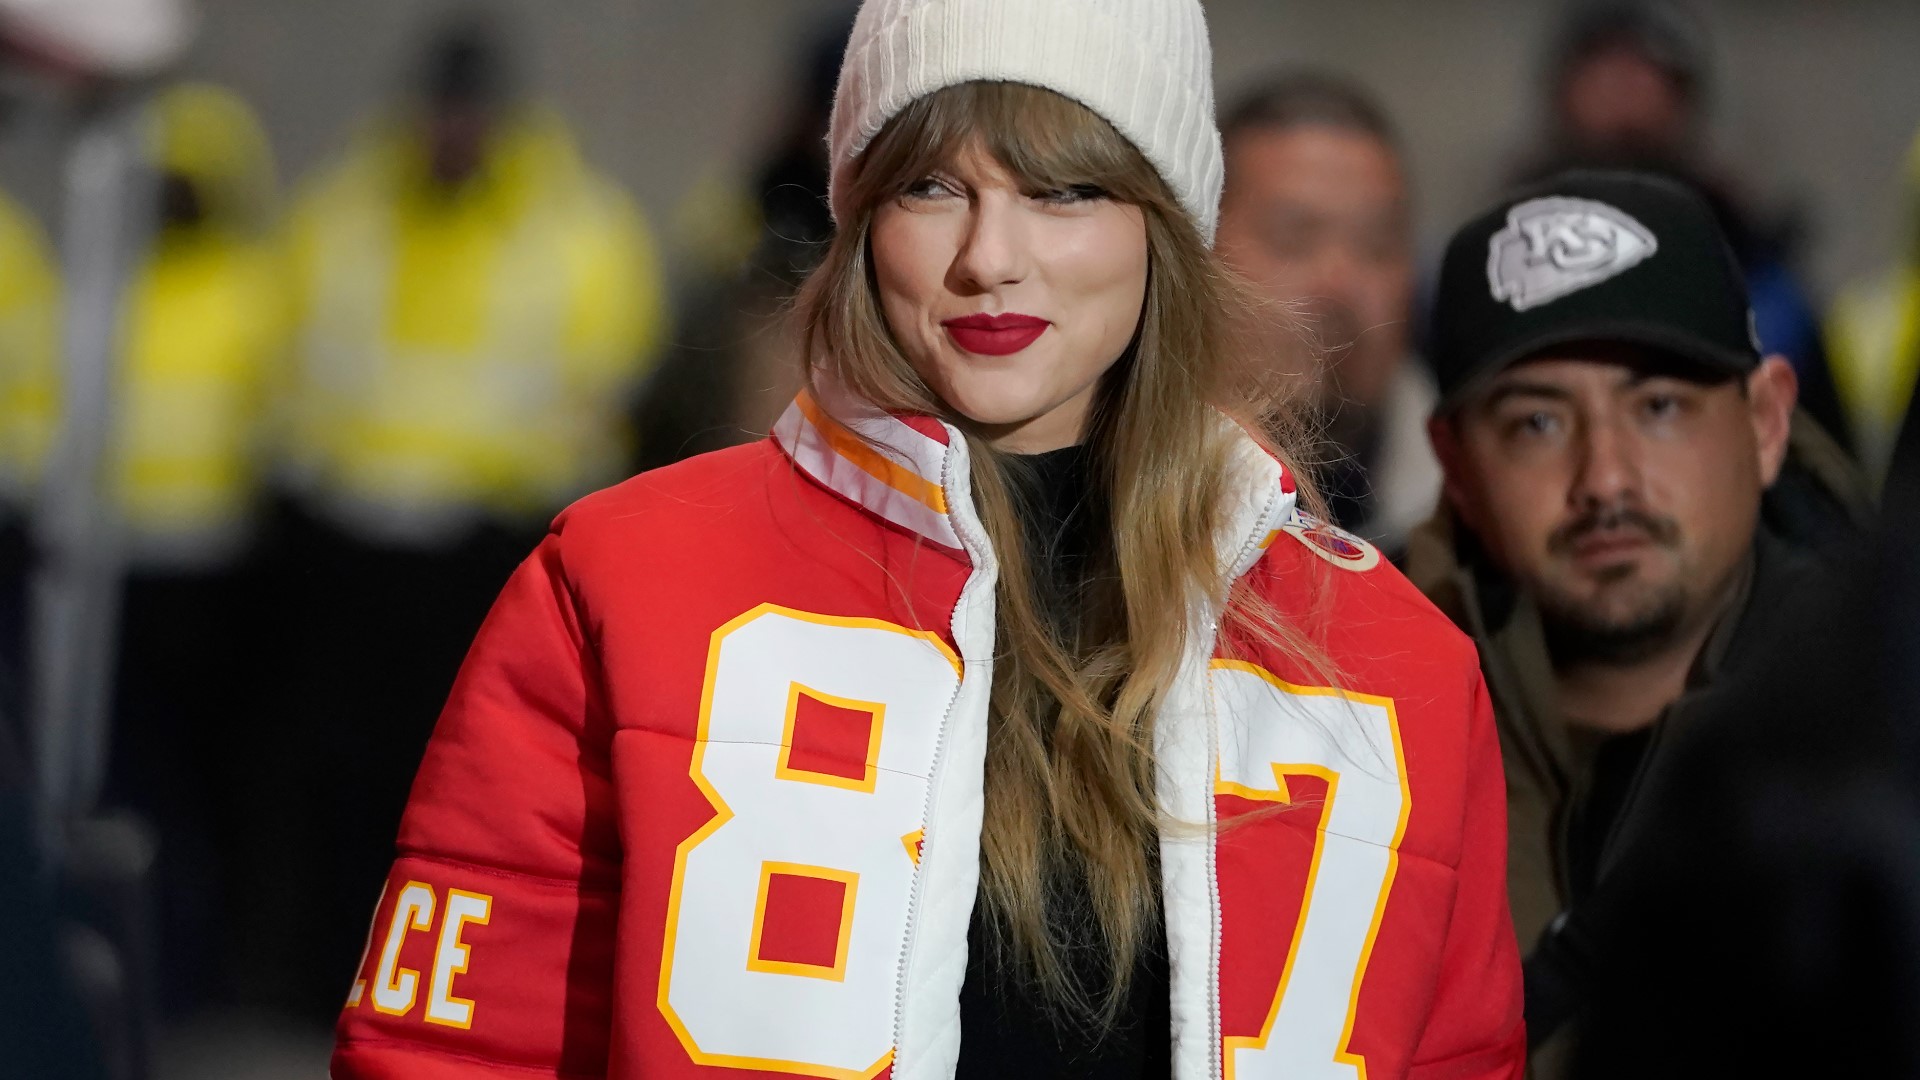 THE UNVERSITY OF MARYLAND GLOBAL CAMPUS IS ANALYZING TAYLOR SWIFT'S USE OF MARKETING...AND HOW IT HAS BENEFITTED NFL VIEWERSHIP.